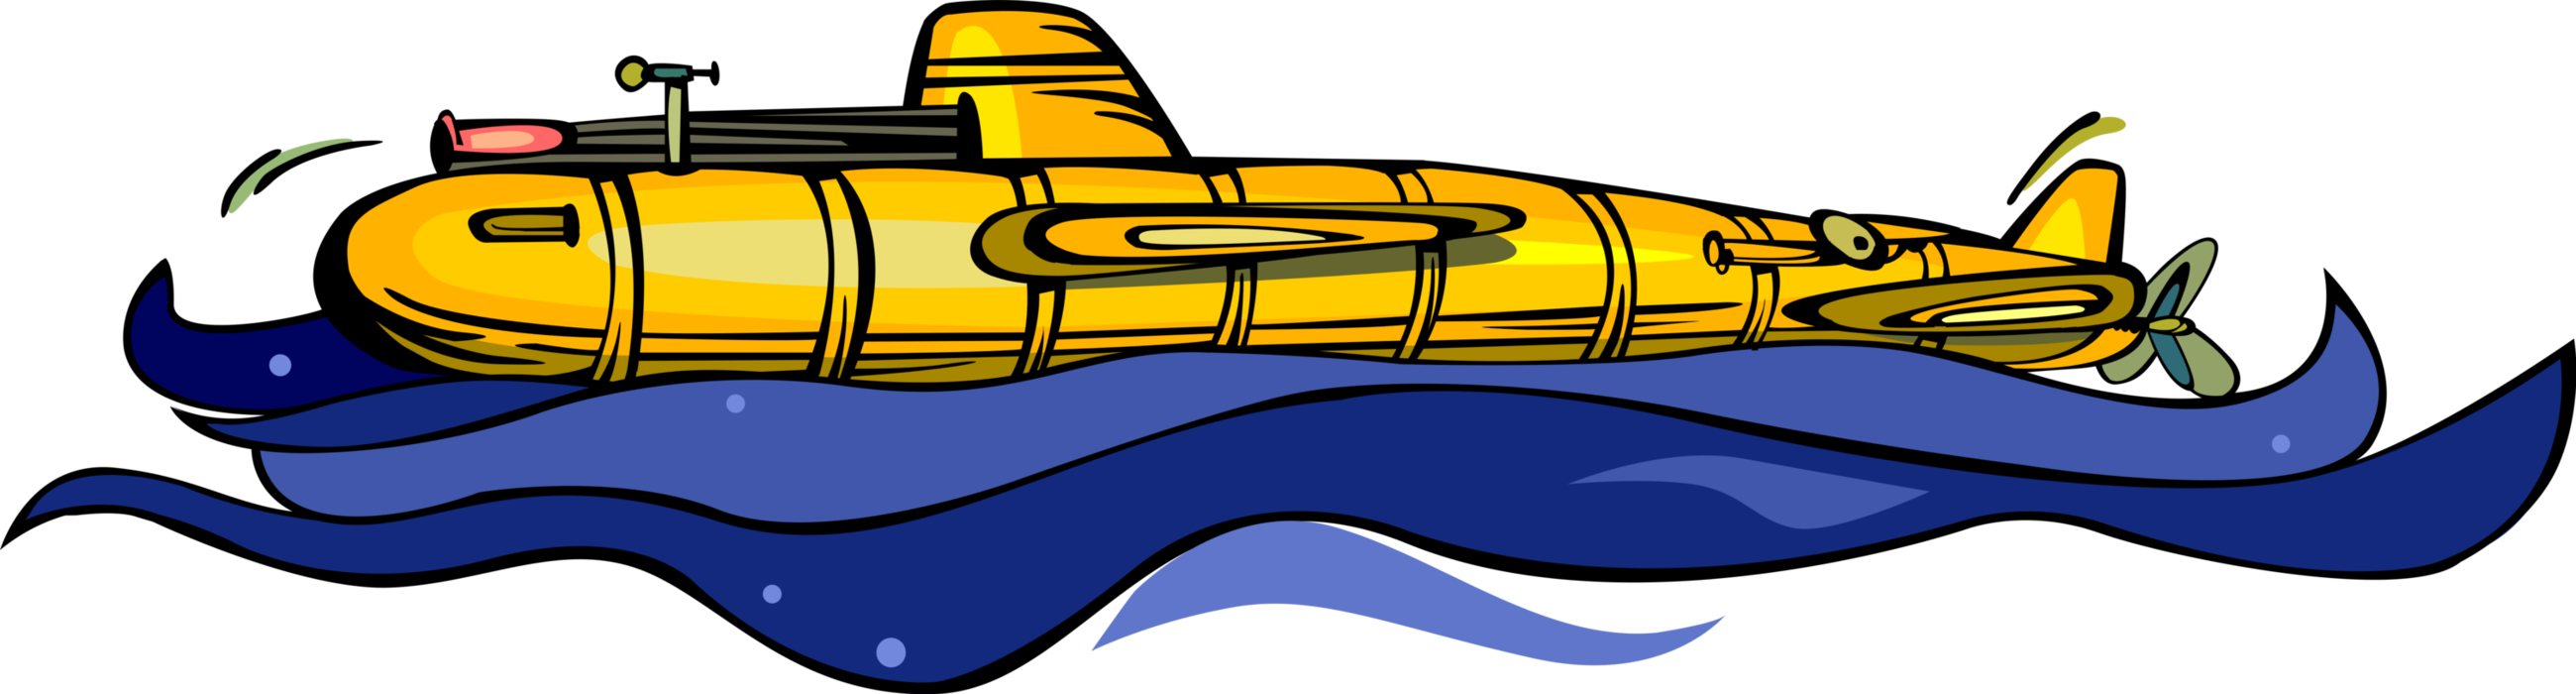 Vector Illustration of Prototype Navy Submersible Under the Sea Submarine from Early 20th Century